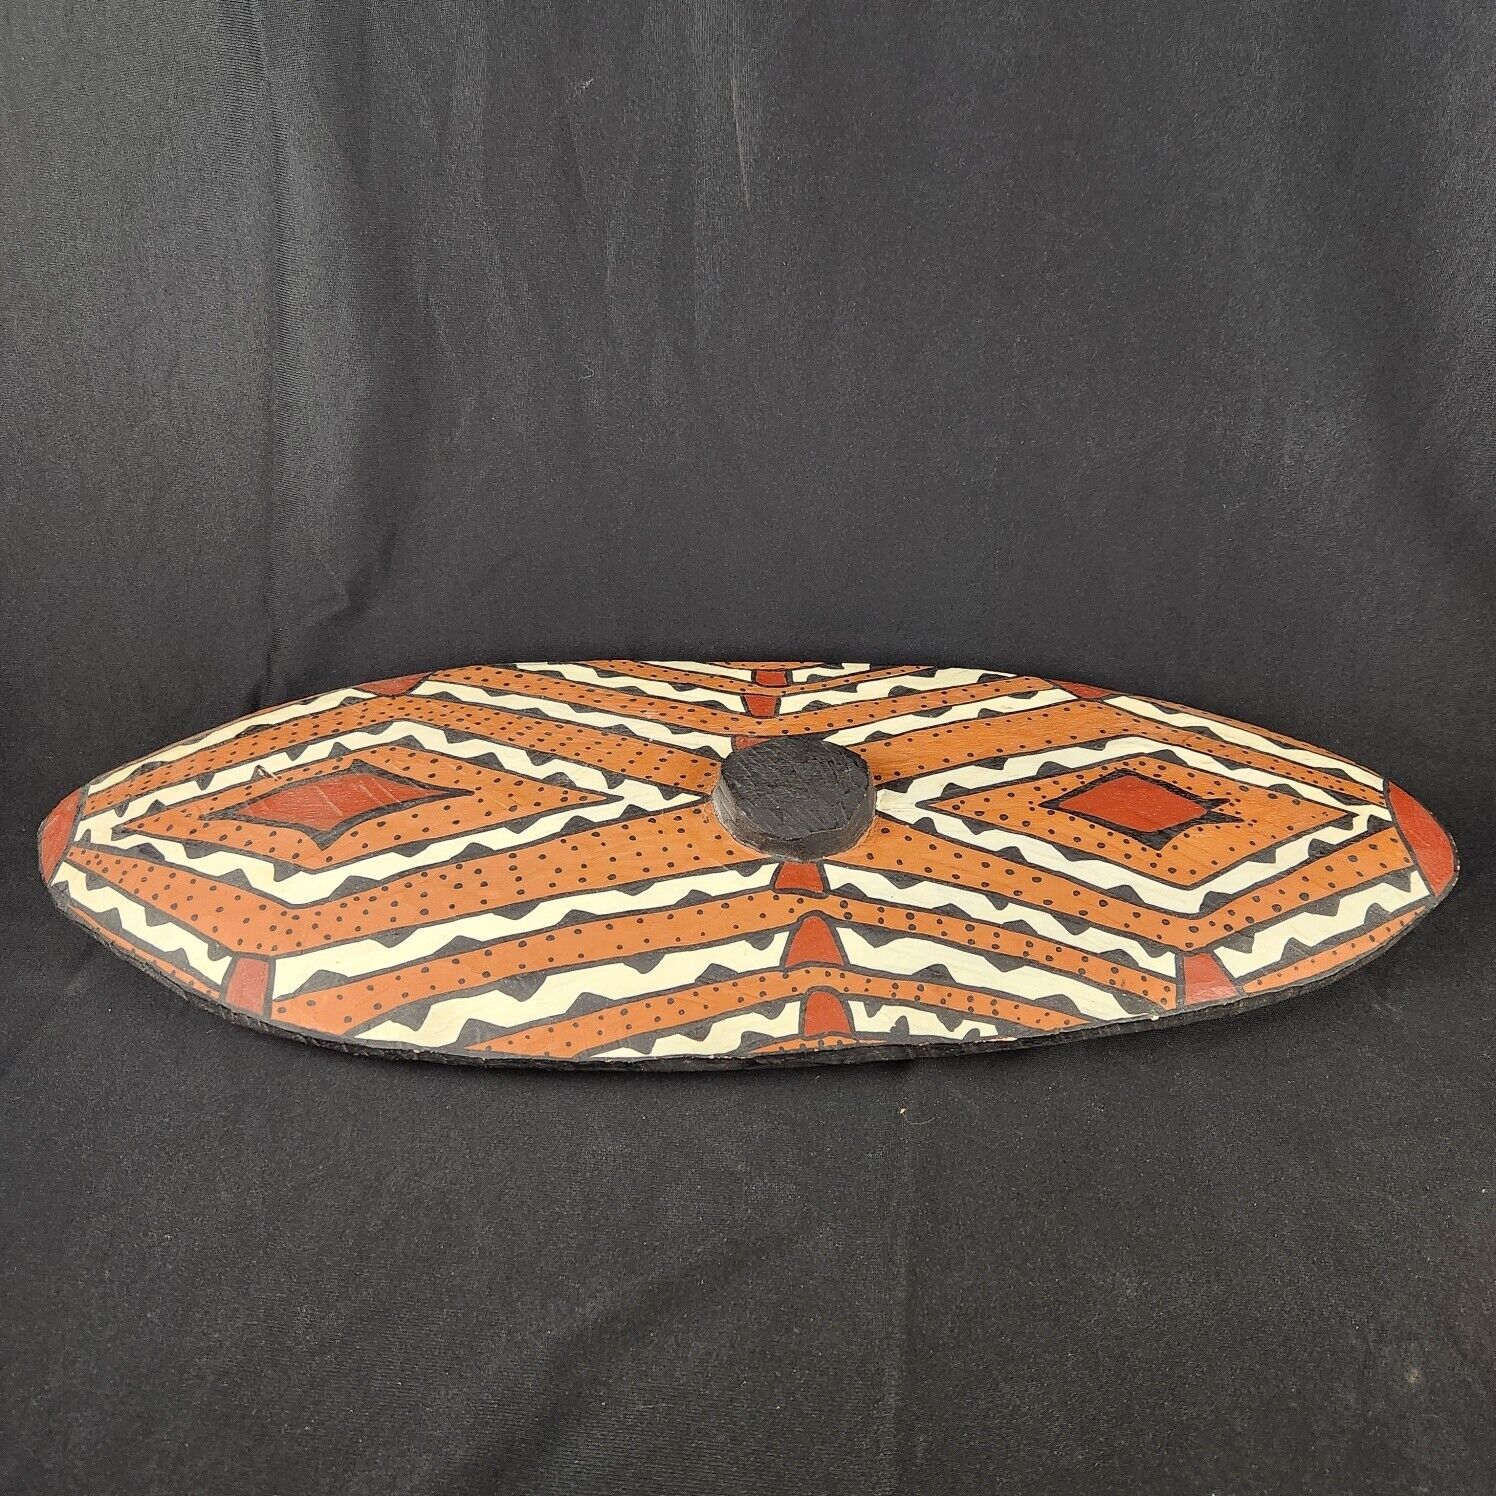 ABORIGINAL Queensland Australia Hand Carved Hand Painted Wooden TRIBAL SHIELD